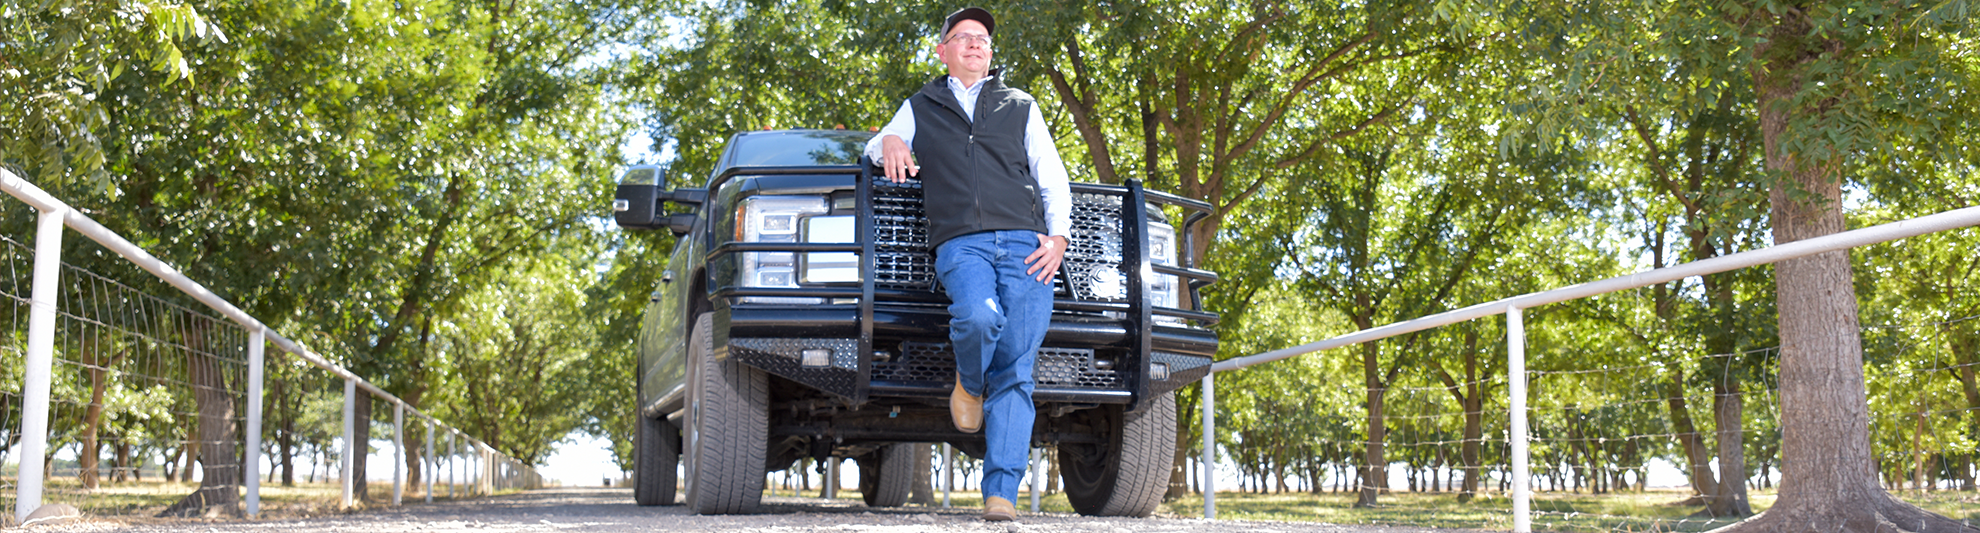 image of man in front of his pick up truck